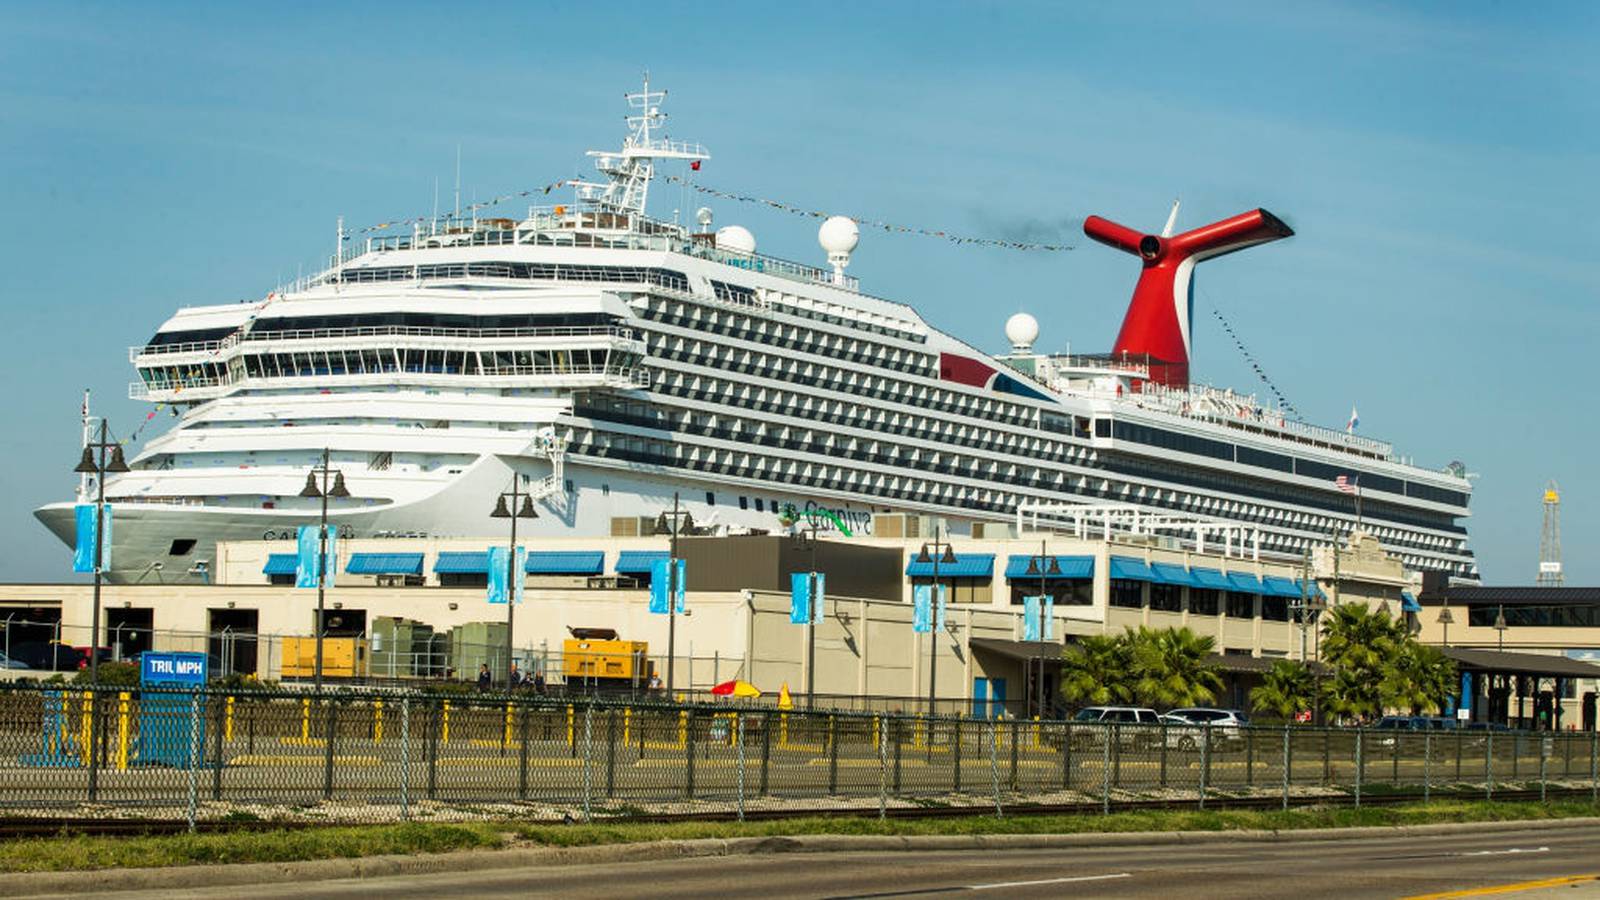 ‘Why is our tail on fire’ Carnival Freedom ship catches fire after